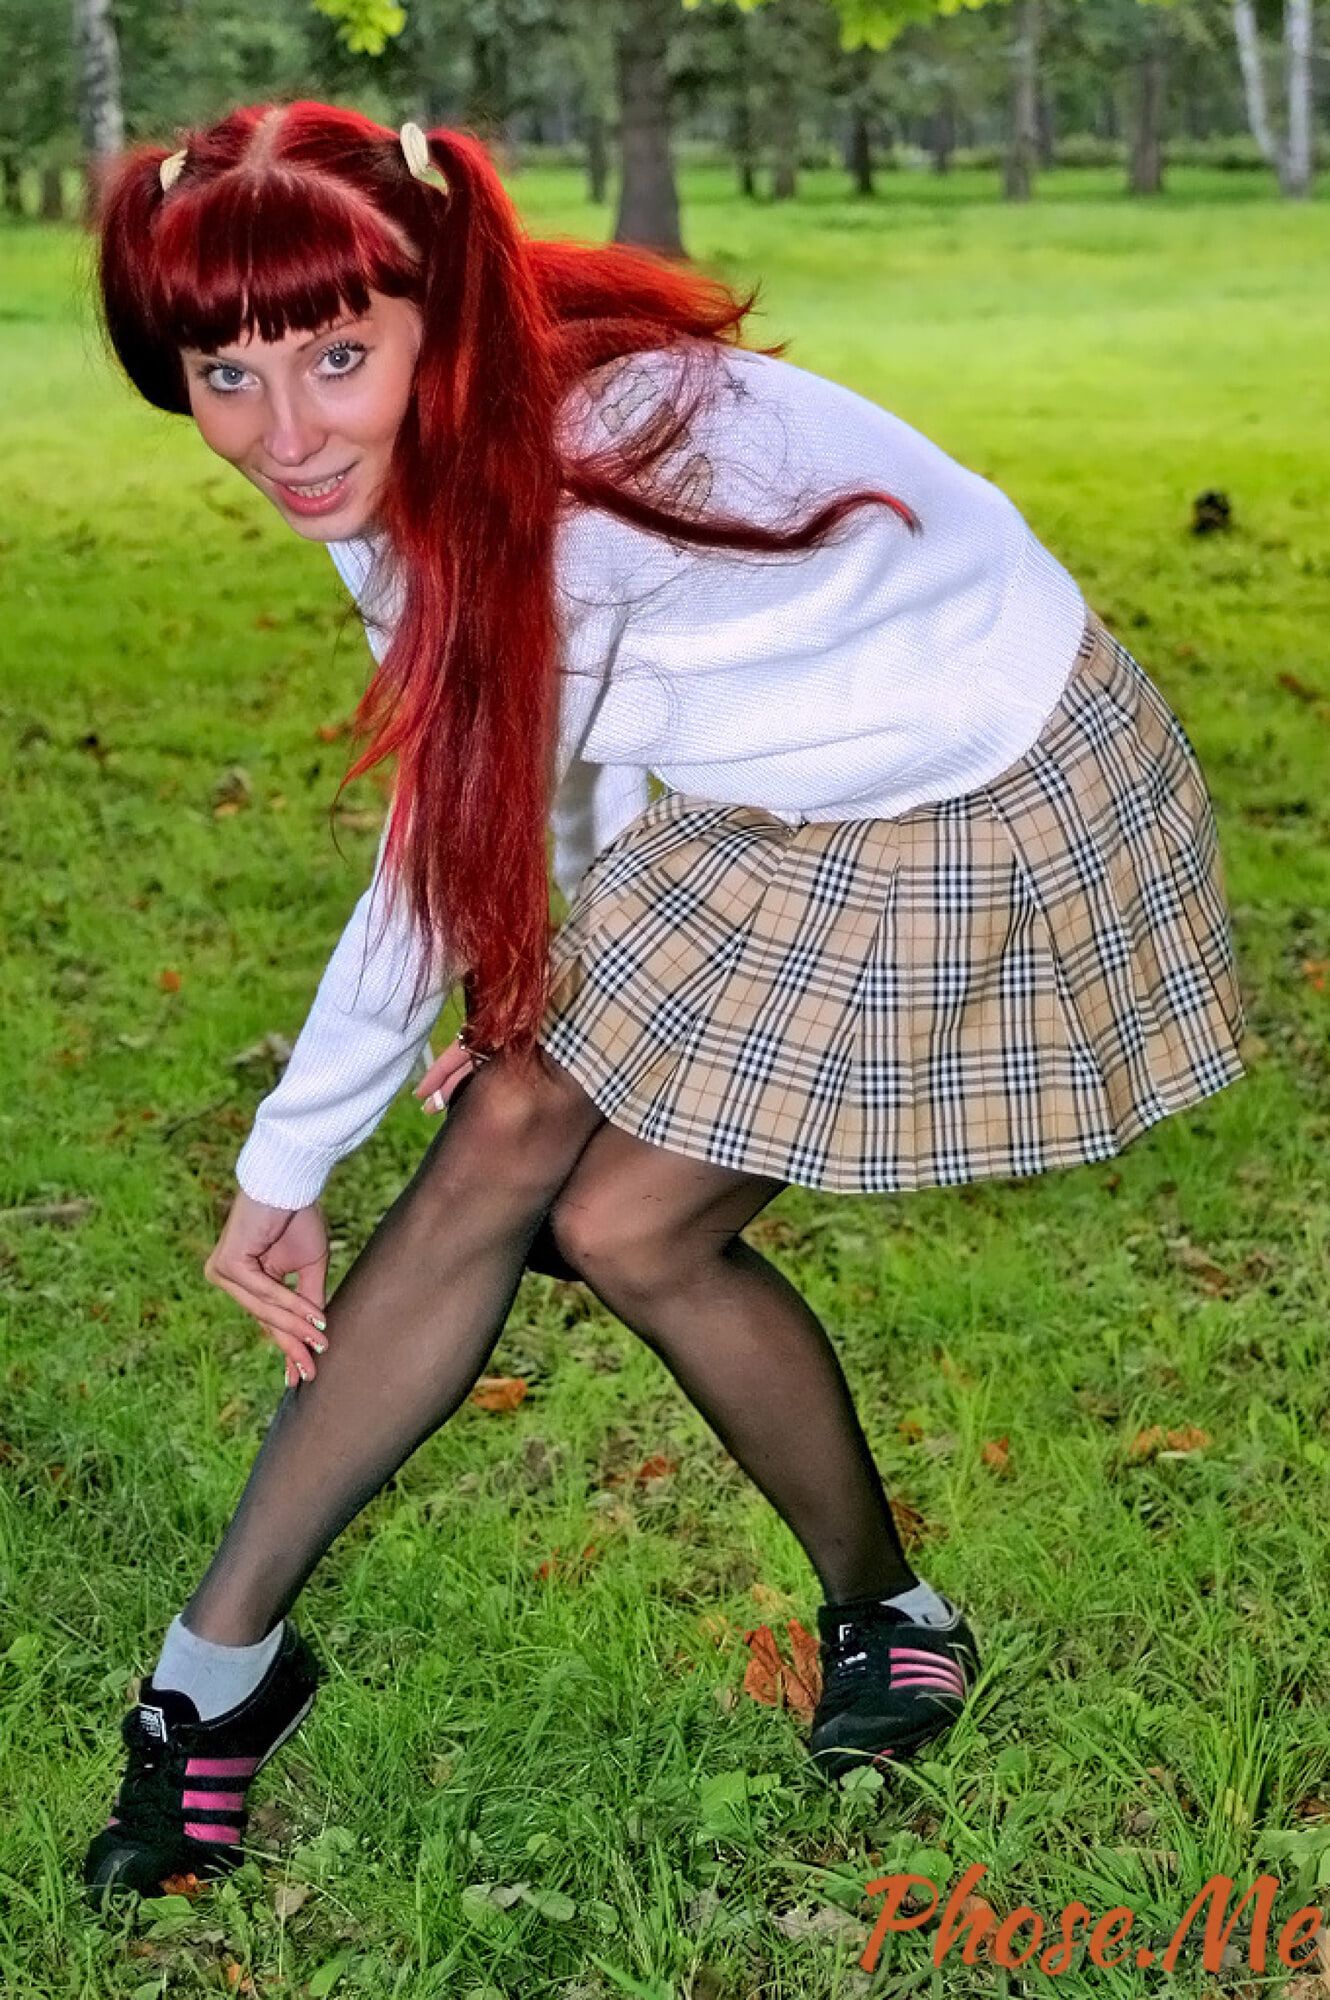 Redhead Outdoors In Plaid Skirt and Black Pantyhose #4